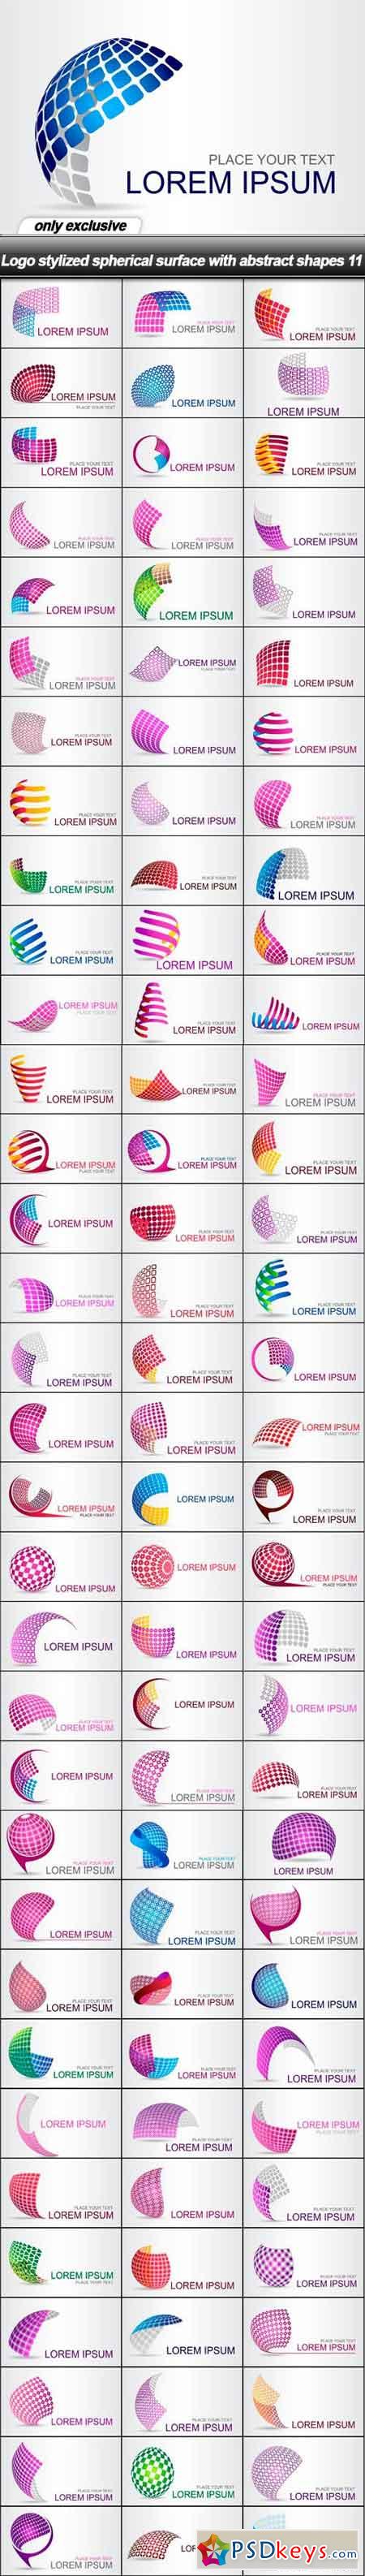 Logo stylized spherical surface with abstract shapes 11 - 100 EPS